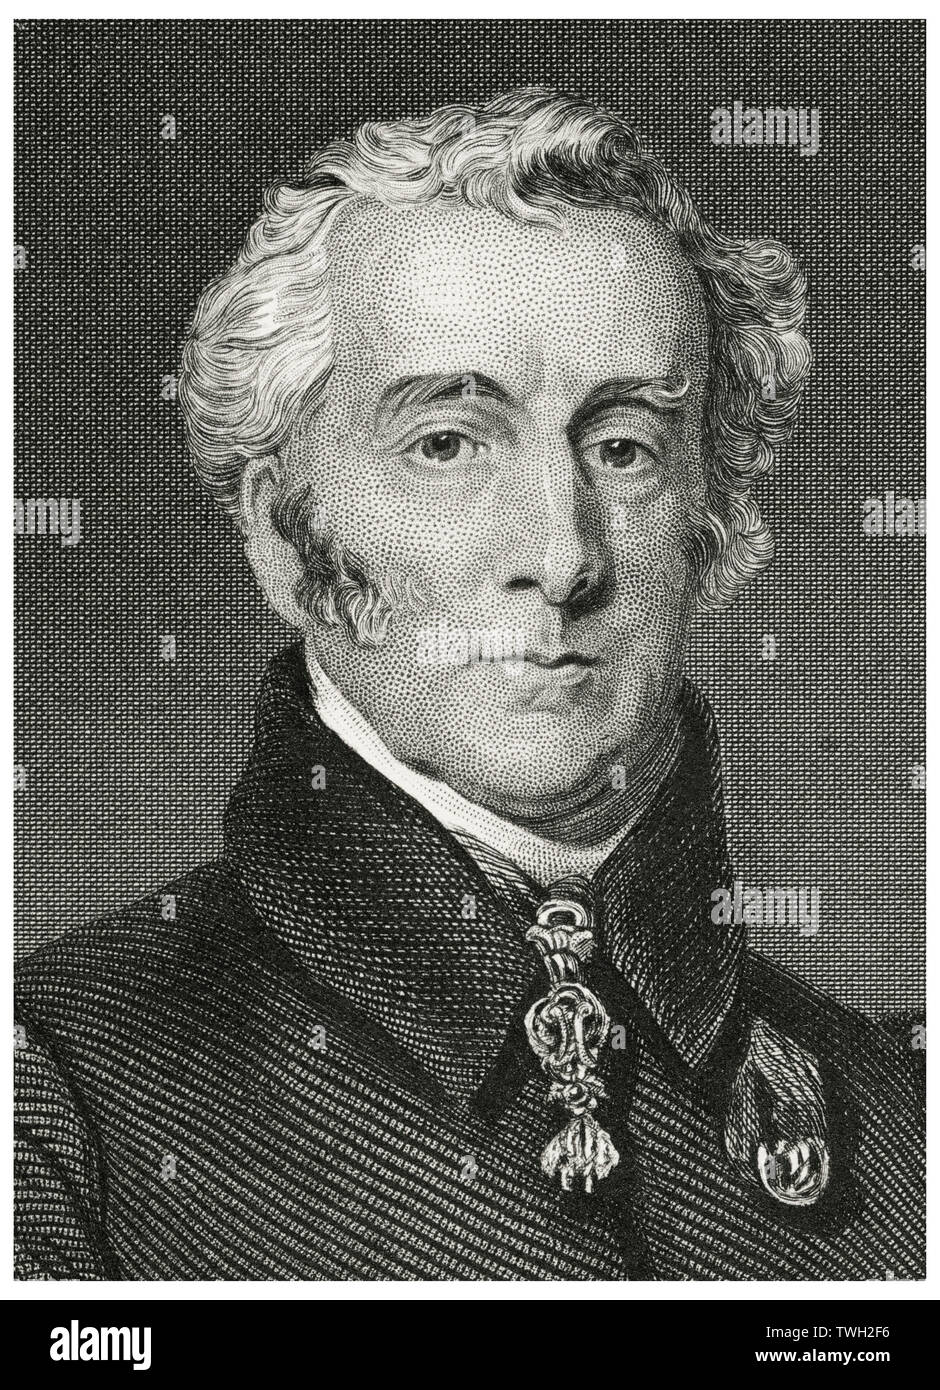 Arthur Wellesley (1769-1852), 1st Duke of Wellington, Leading British Military and Political Figure, serving twice as Prime Minister of the United Kingdom 1828-30, 1834-34, Head and Shoulders Portrait, Steel Engraving, Portrait Gallery of Eminent Men and Women of Europe and America by Evert A. Duyckinck, Published by Henry J. Johnson, Johnson, Wilson & Company, New York, 1873 Stock Photo